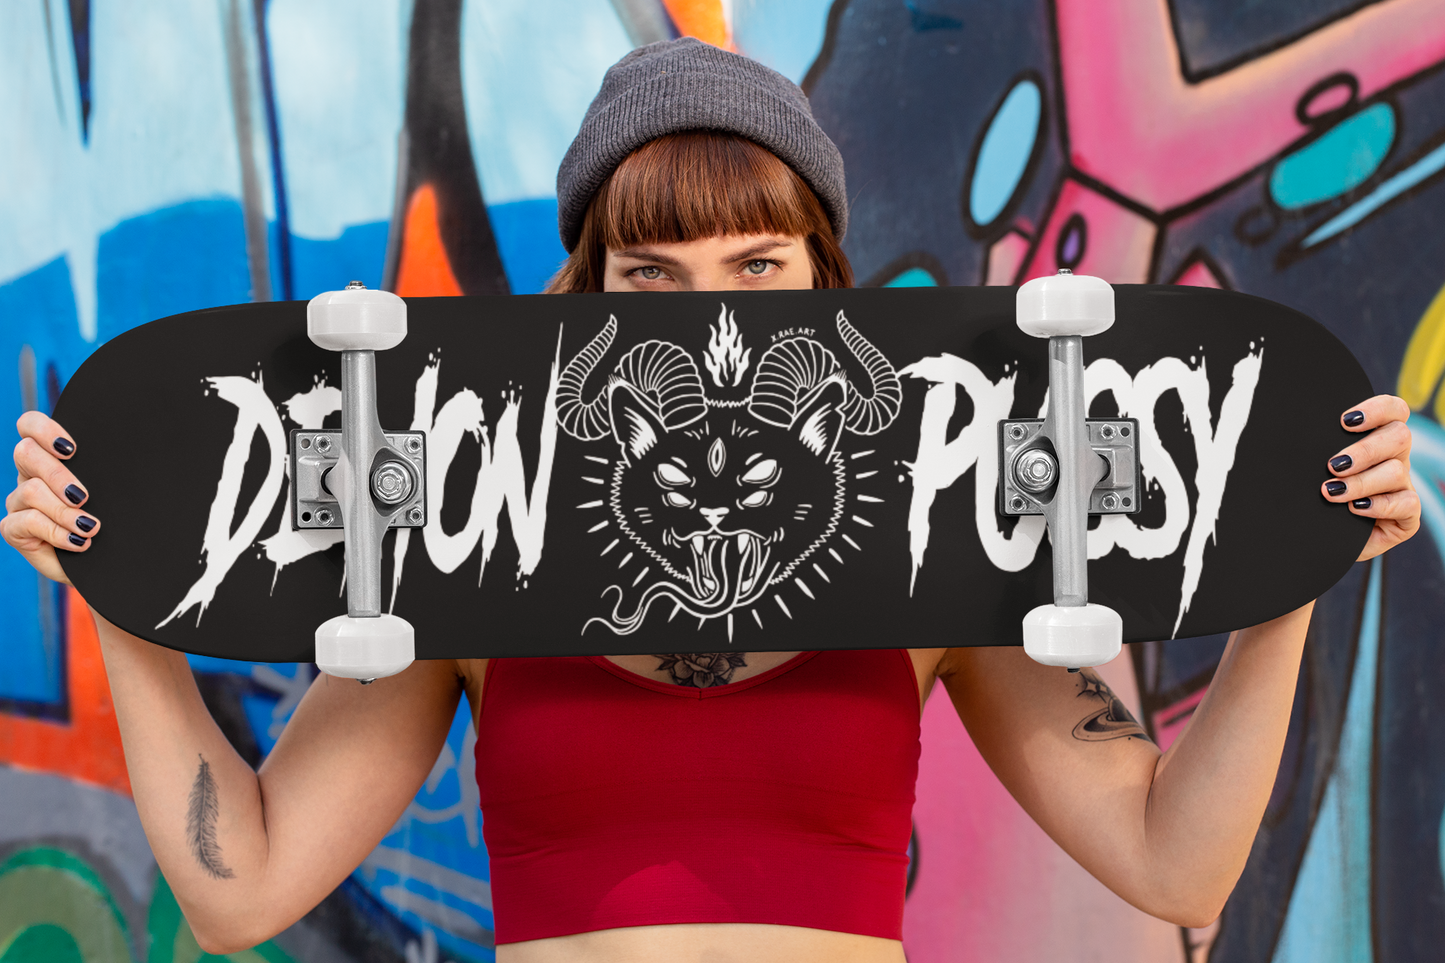 Load image into Gallery viewer, DEMON P*SSY 8-inch Skate Deck
